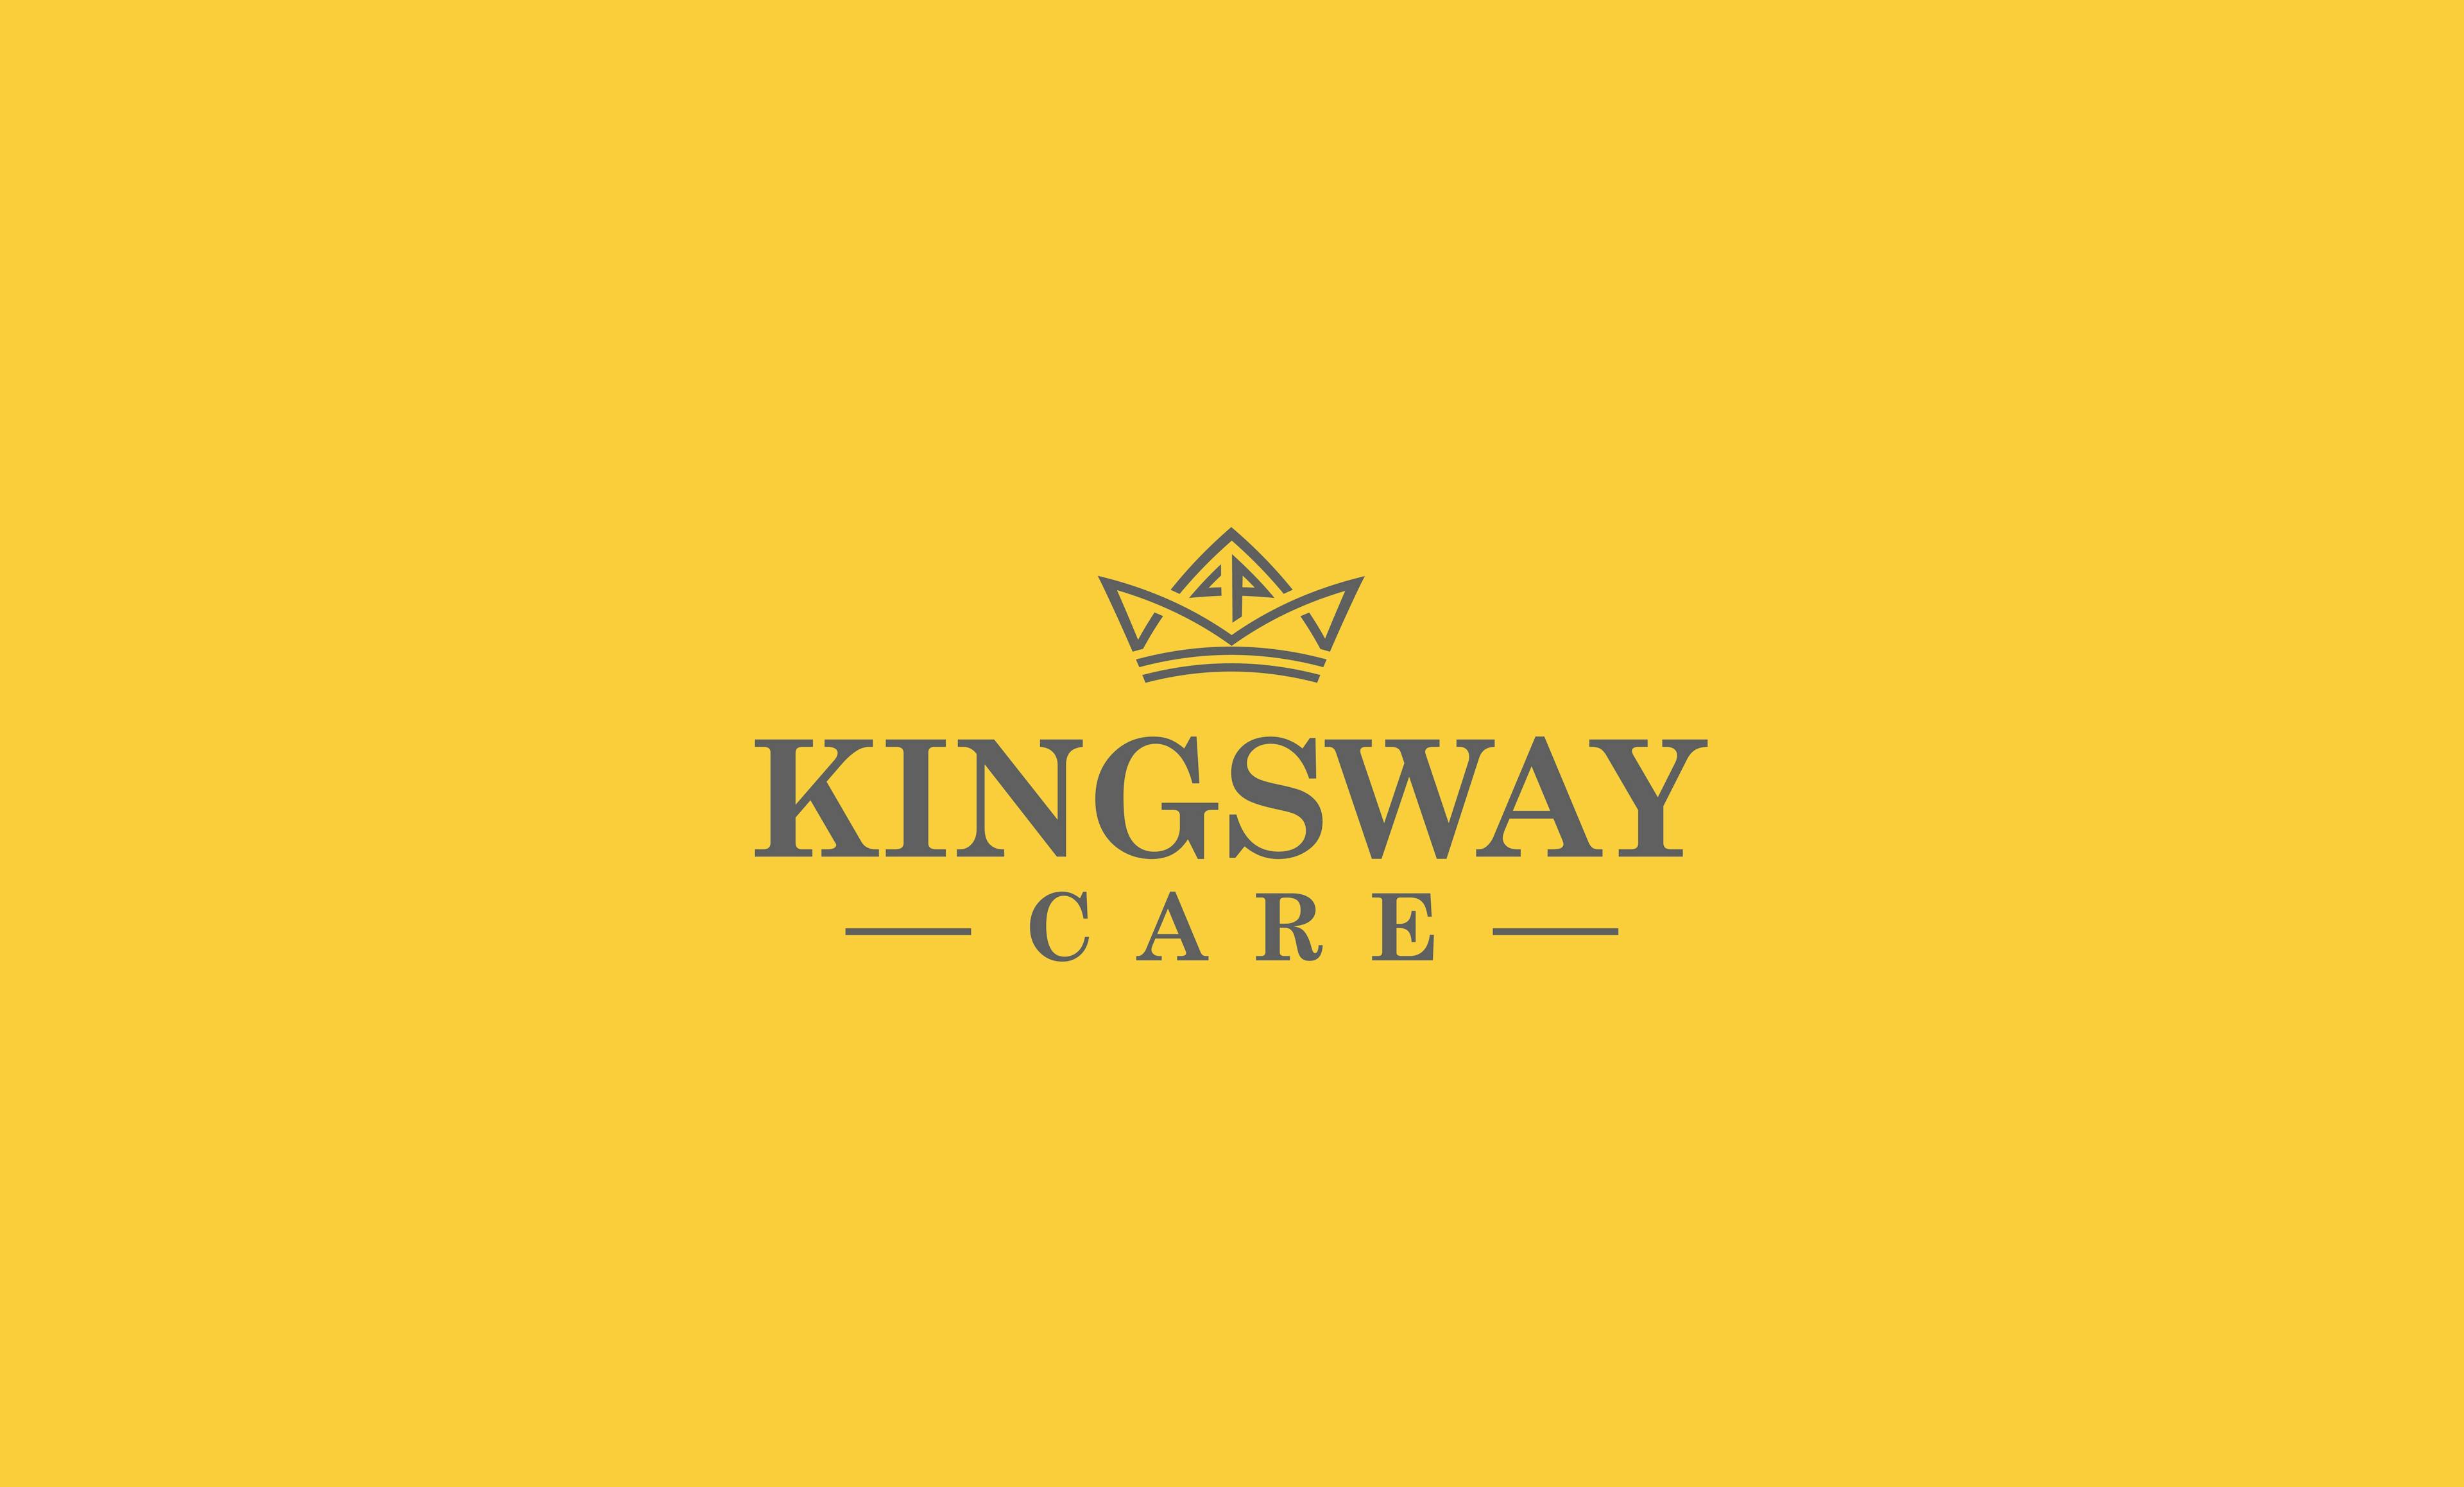 Kingsway Care Brighton & Hove Care Home